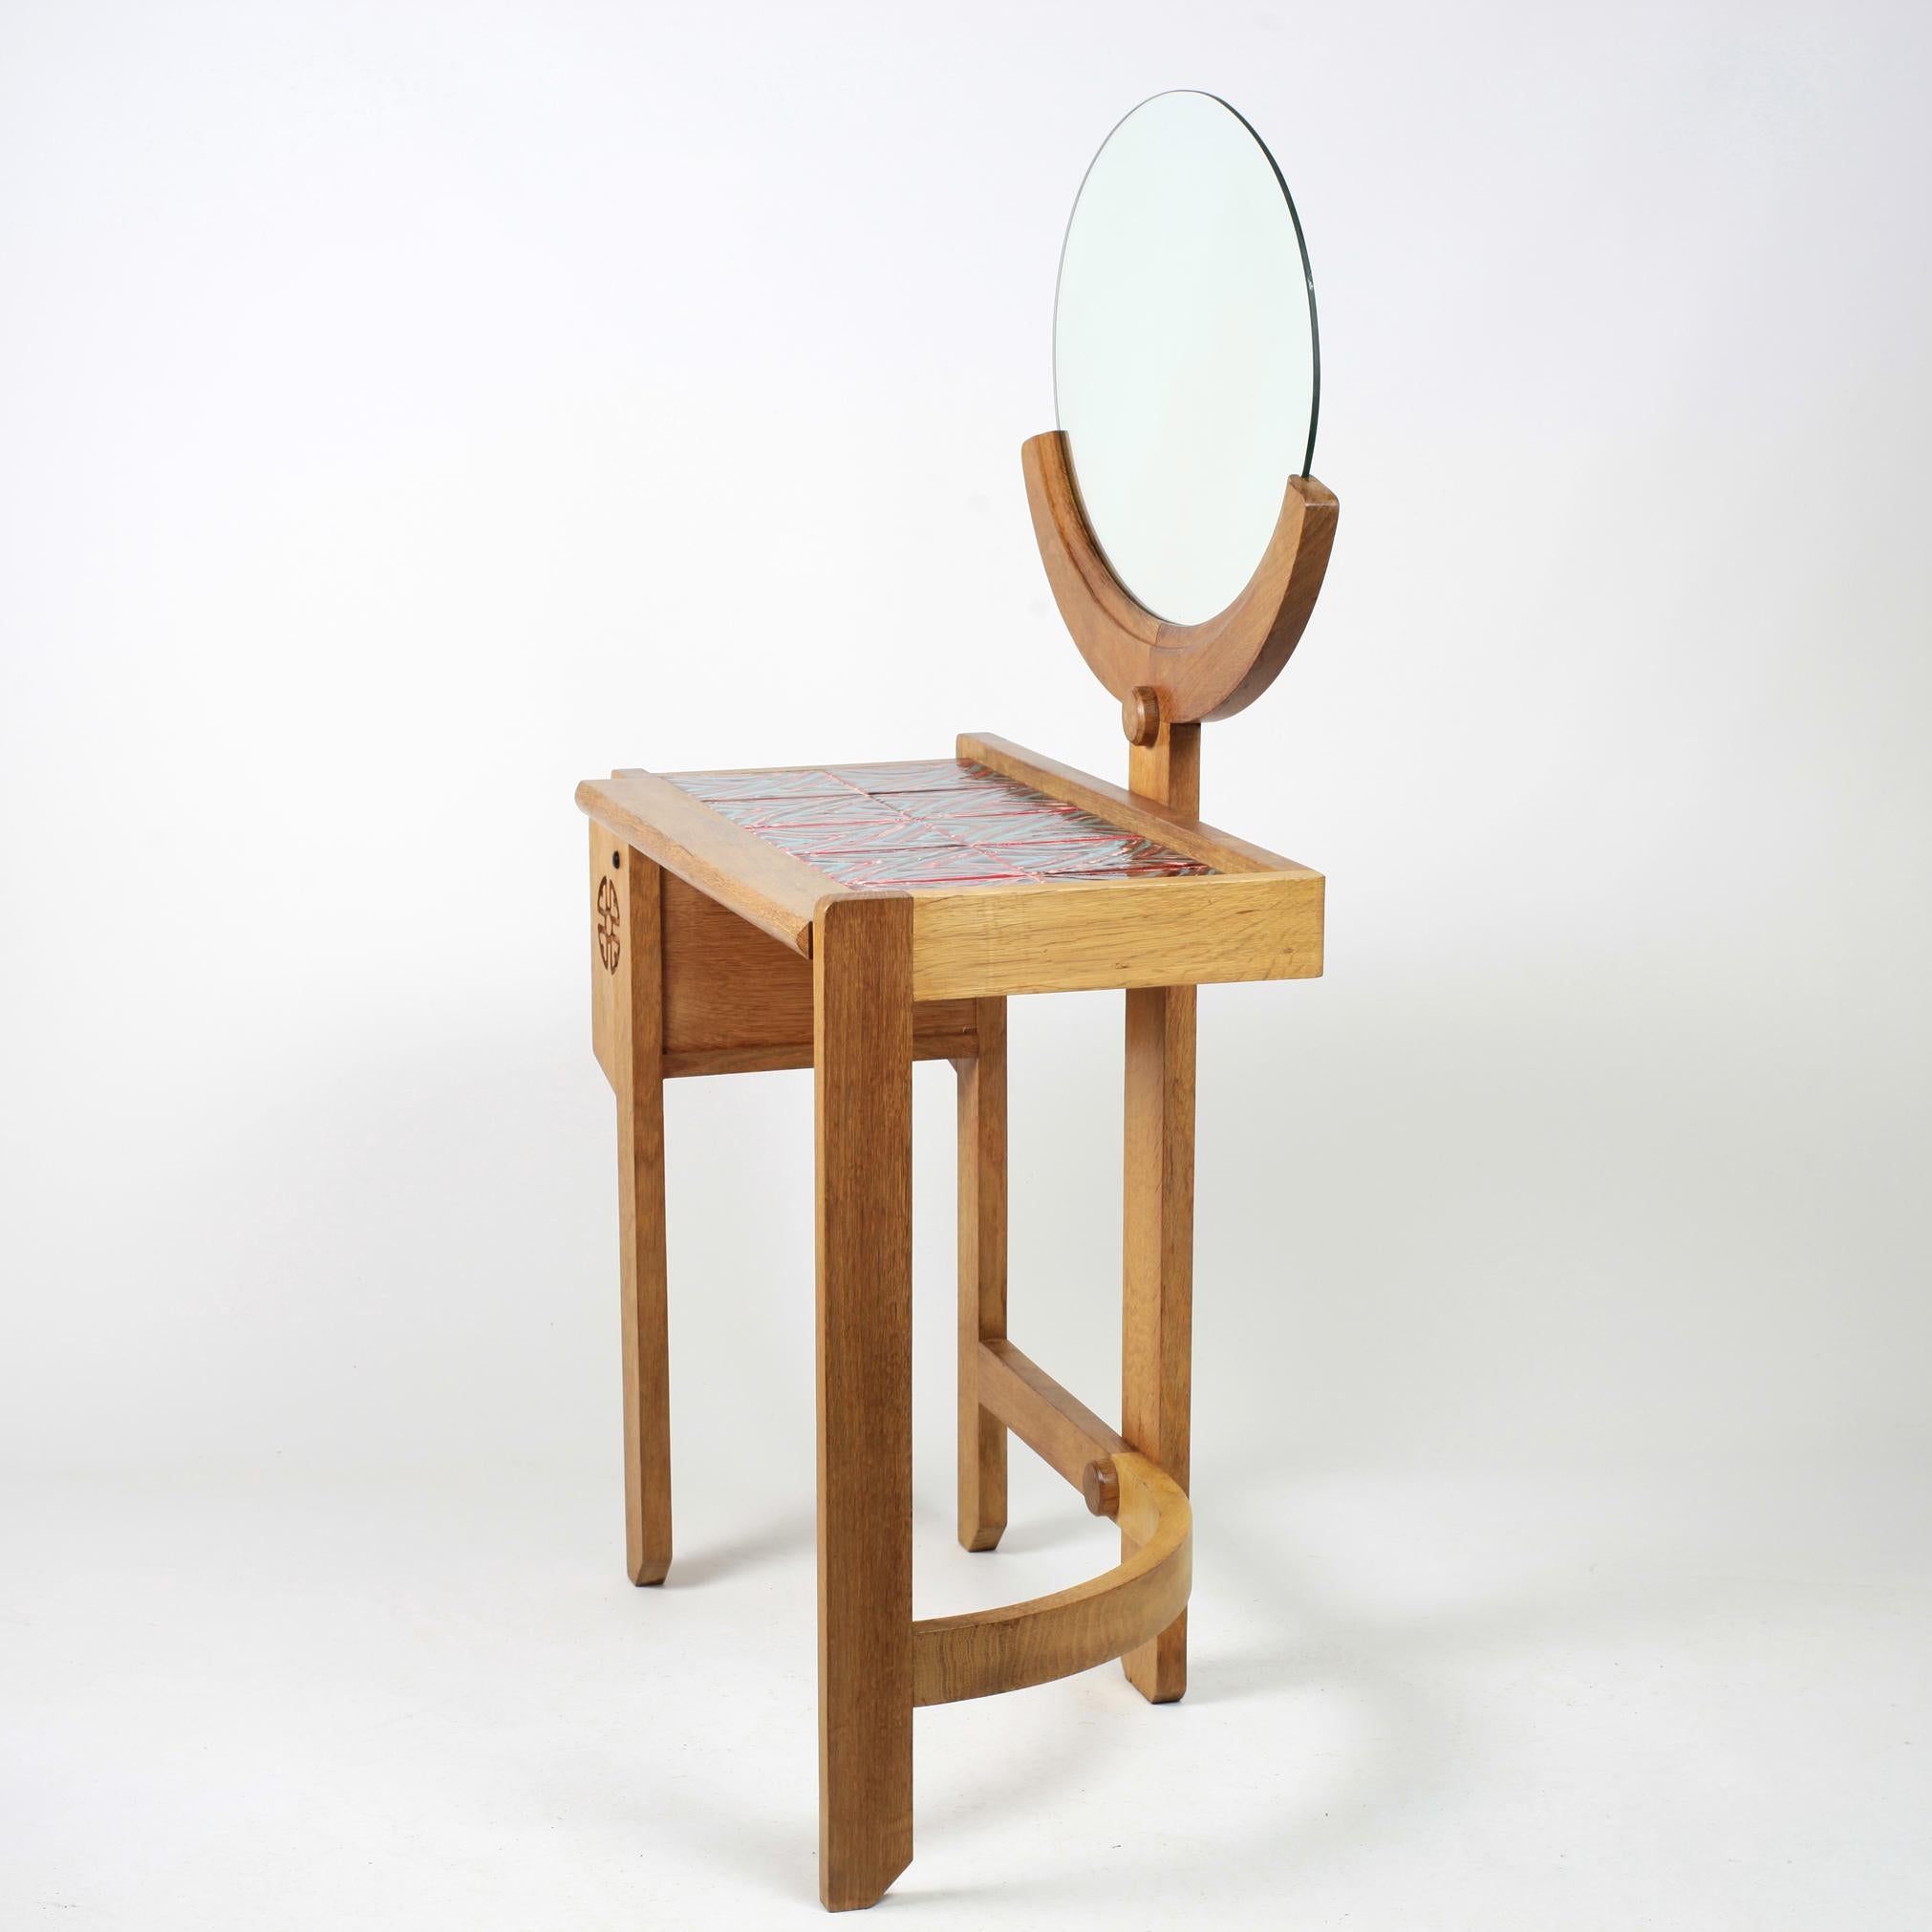 Solid oak vanity with mirror by Robert Guillerme and Jacques Chambron manufactured by Votre Maison.
The ceramics on the top by Boleslaw Danikowski.
Beautiful patina.
 